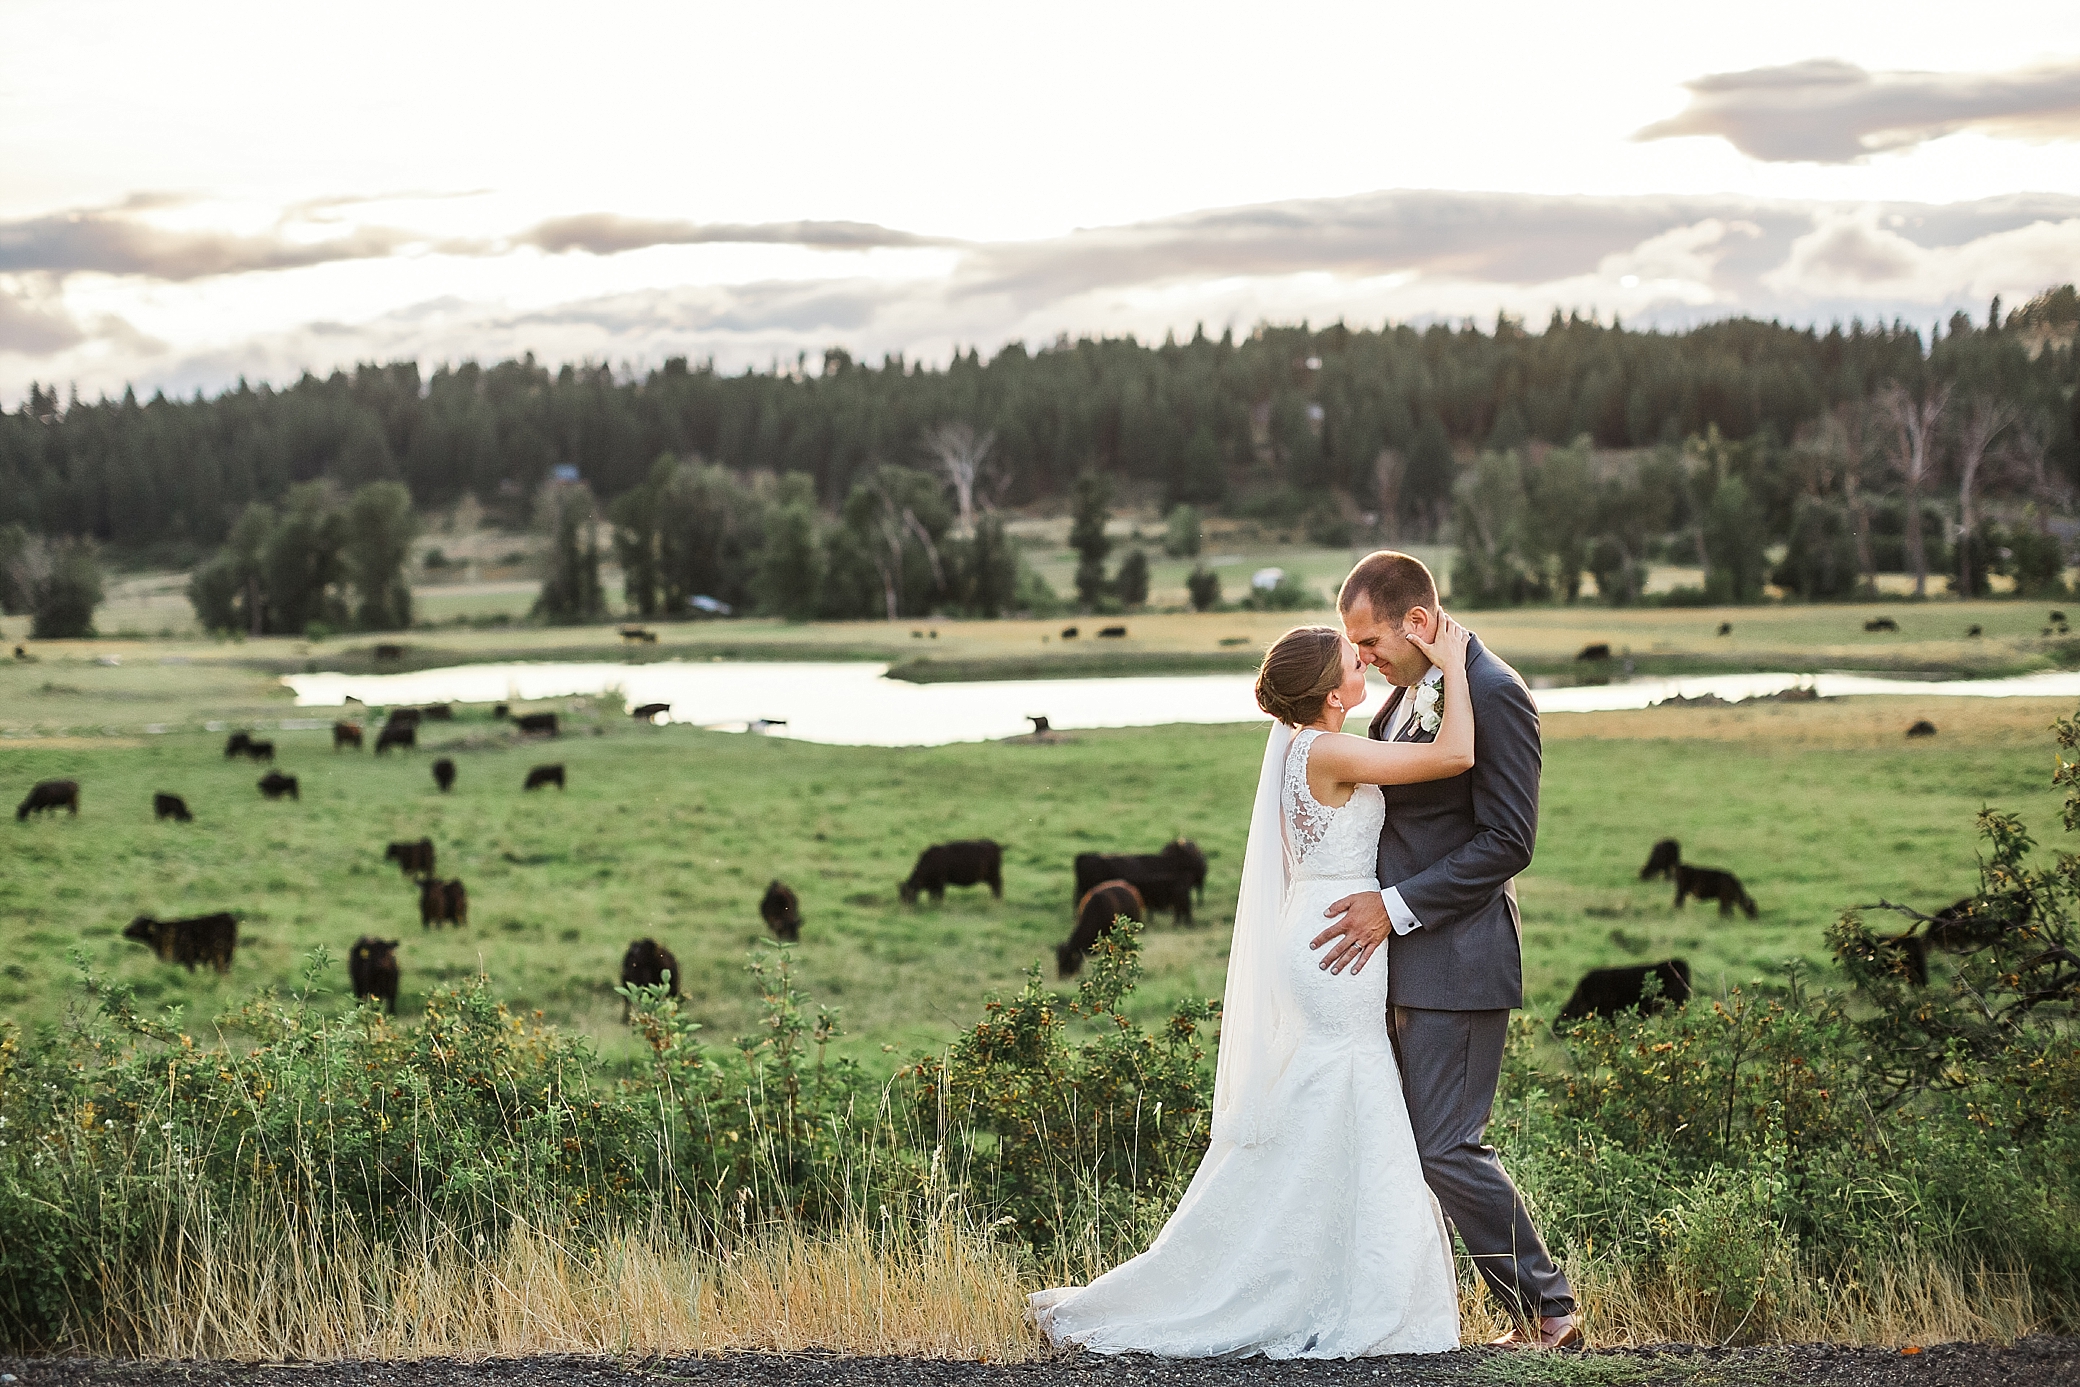 Bride and Groom Wedding Portraits at The Cattle Barn | Megan Montalvo Photography